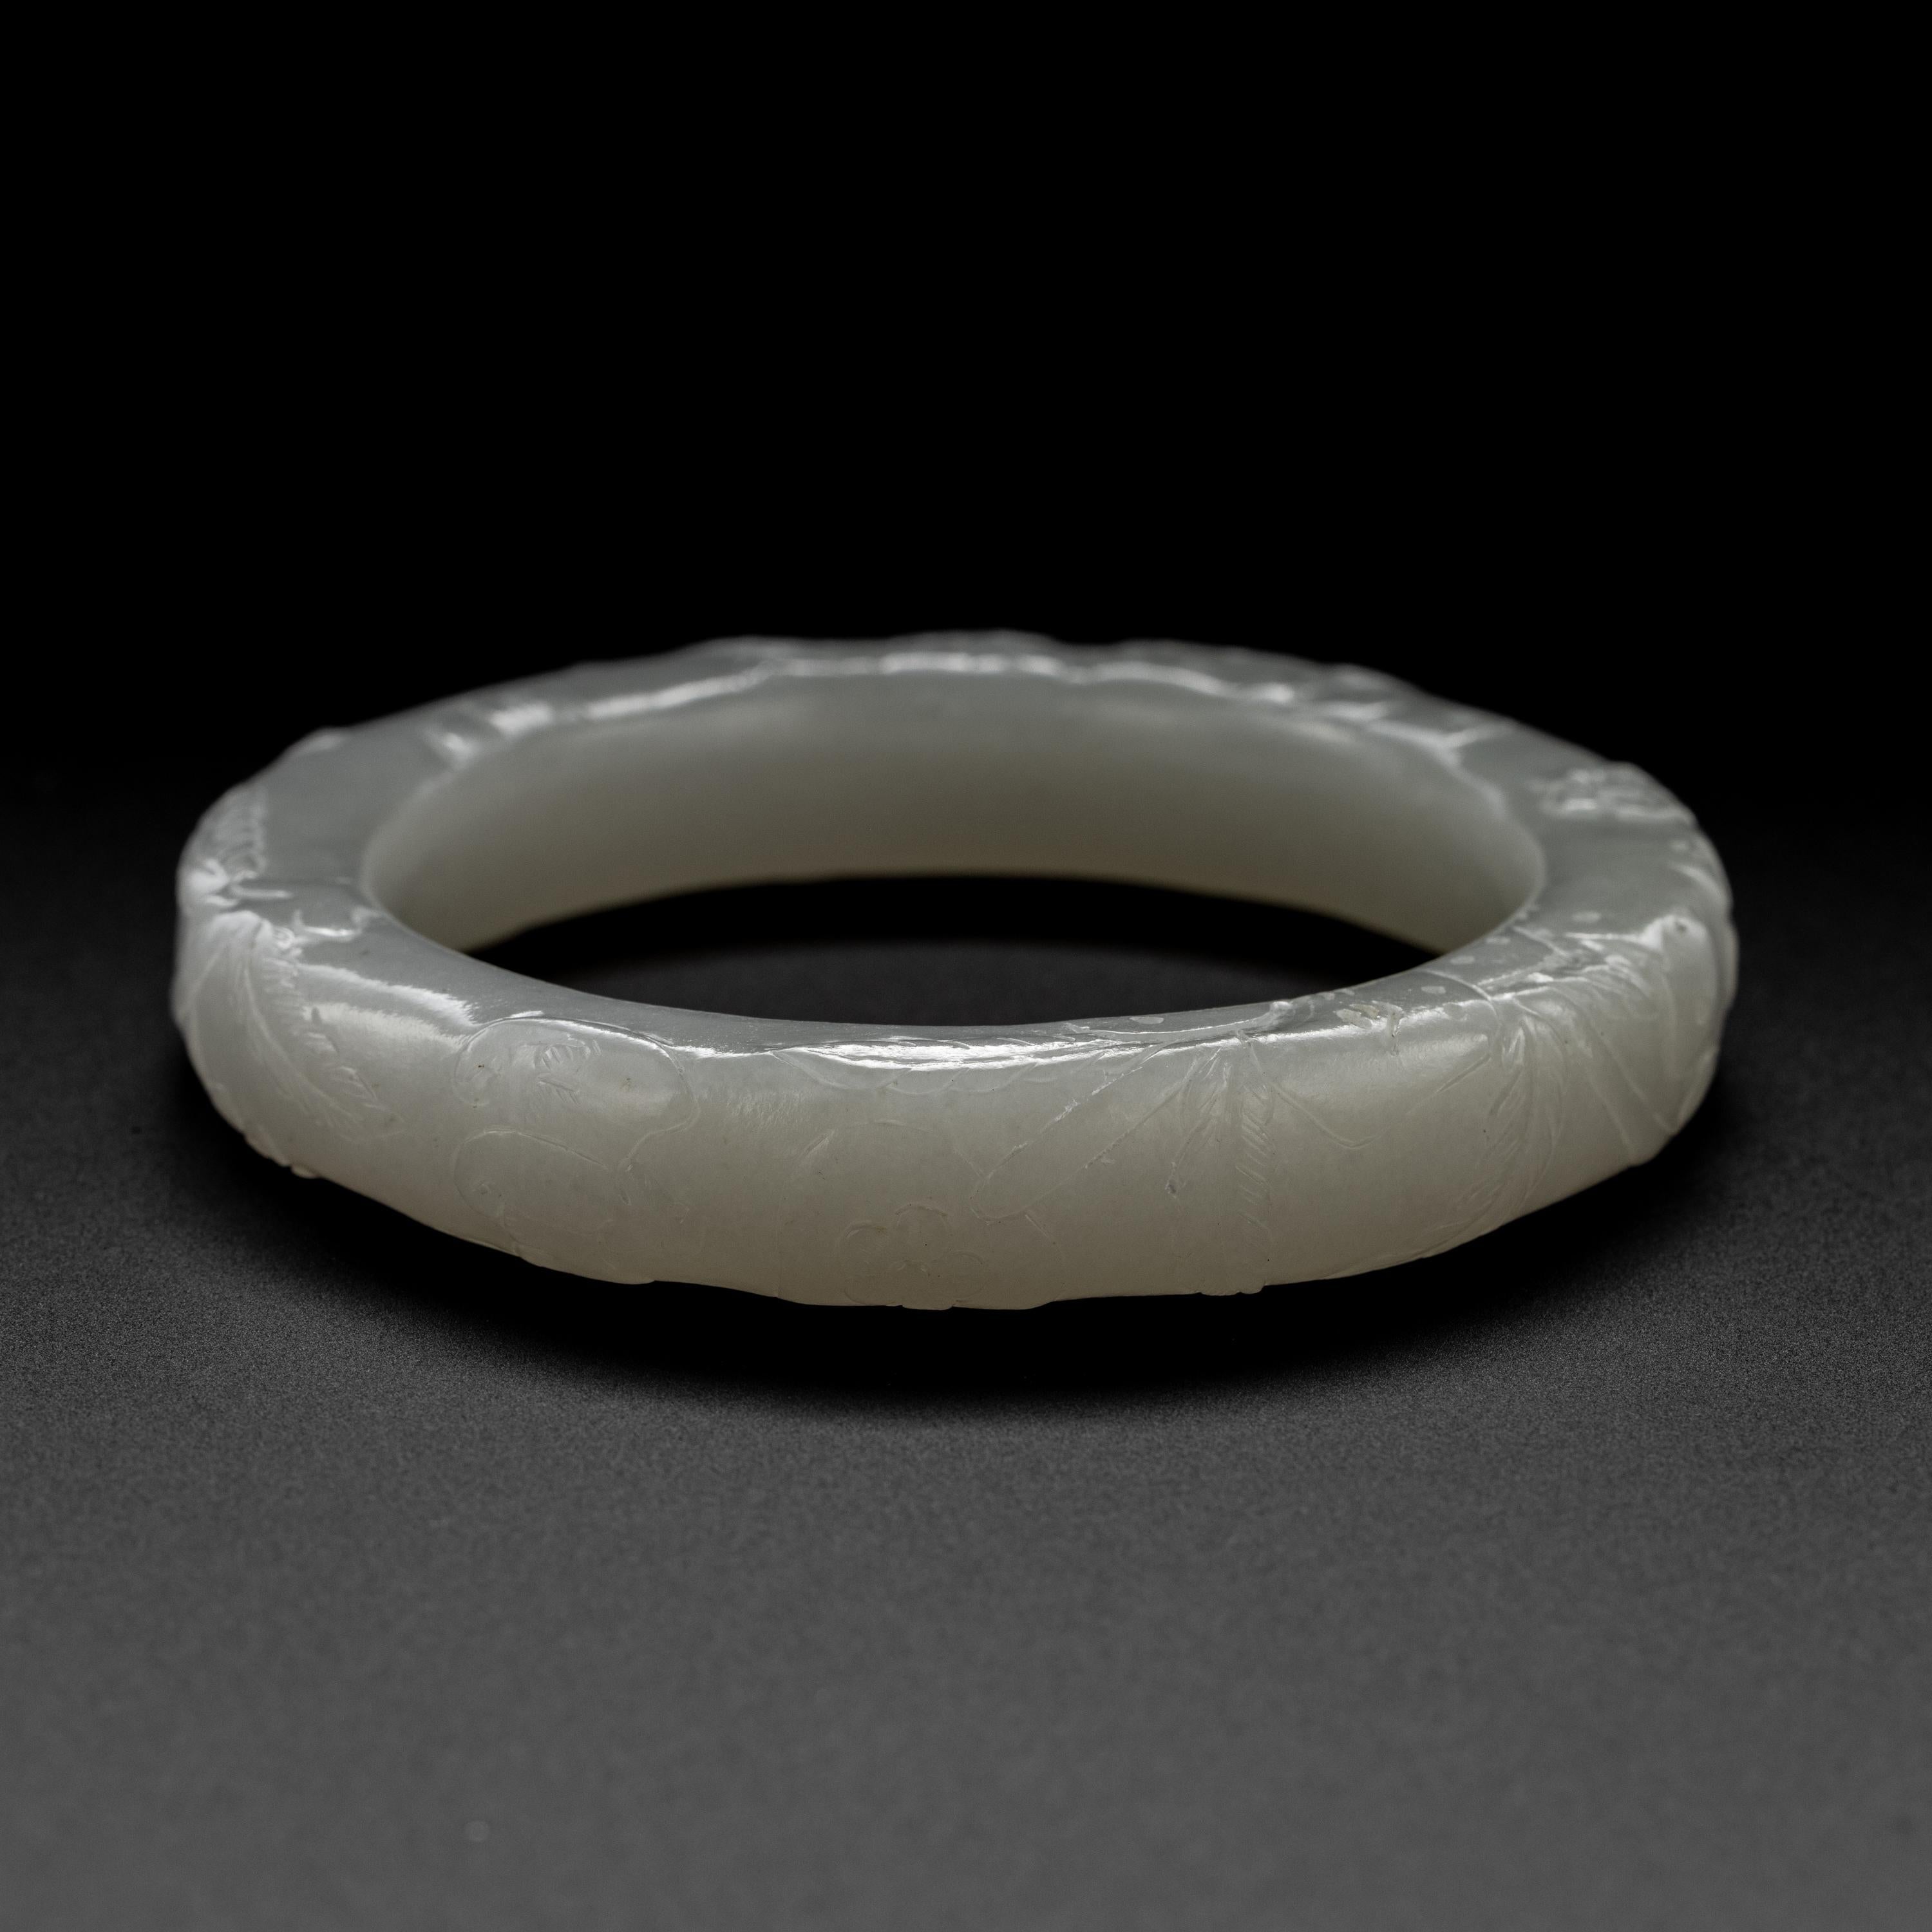 This 60mm hand-carved white nephrite jade bangle is exceptionally beautiful and rare. It has exquisite proportions, being thicker than many bangles. It has been etched and carved to depict blossoms, feathers, and several soaring phoenixes.  This is